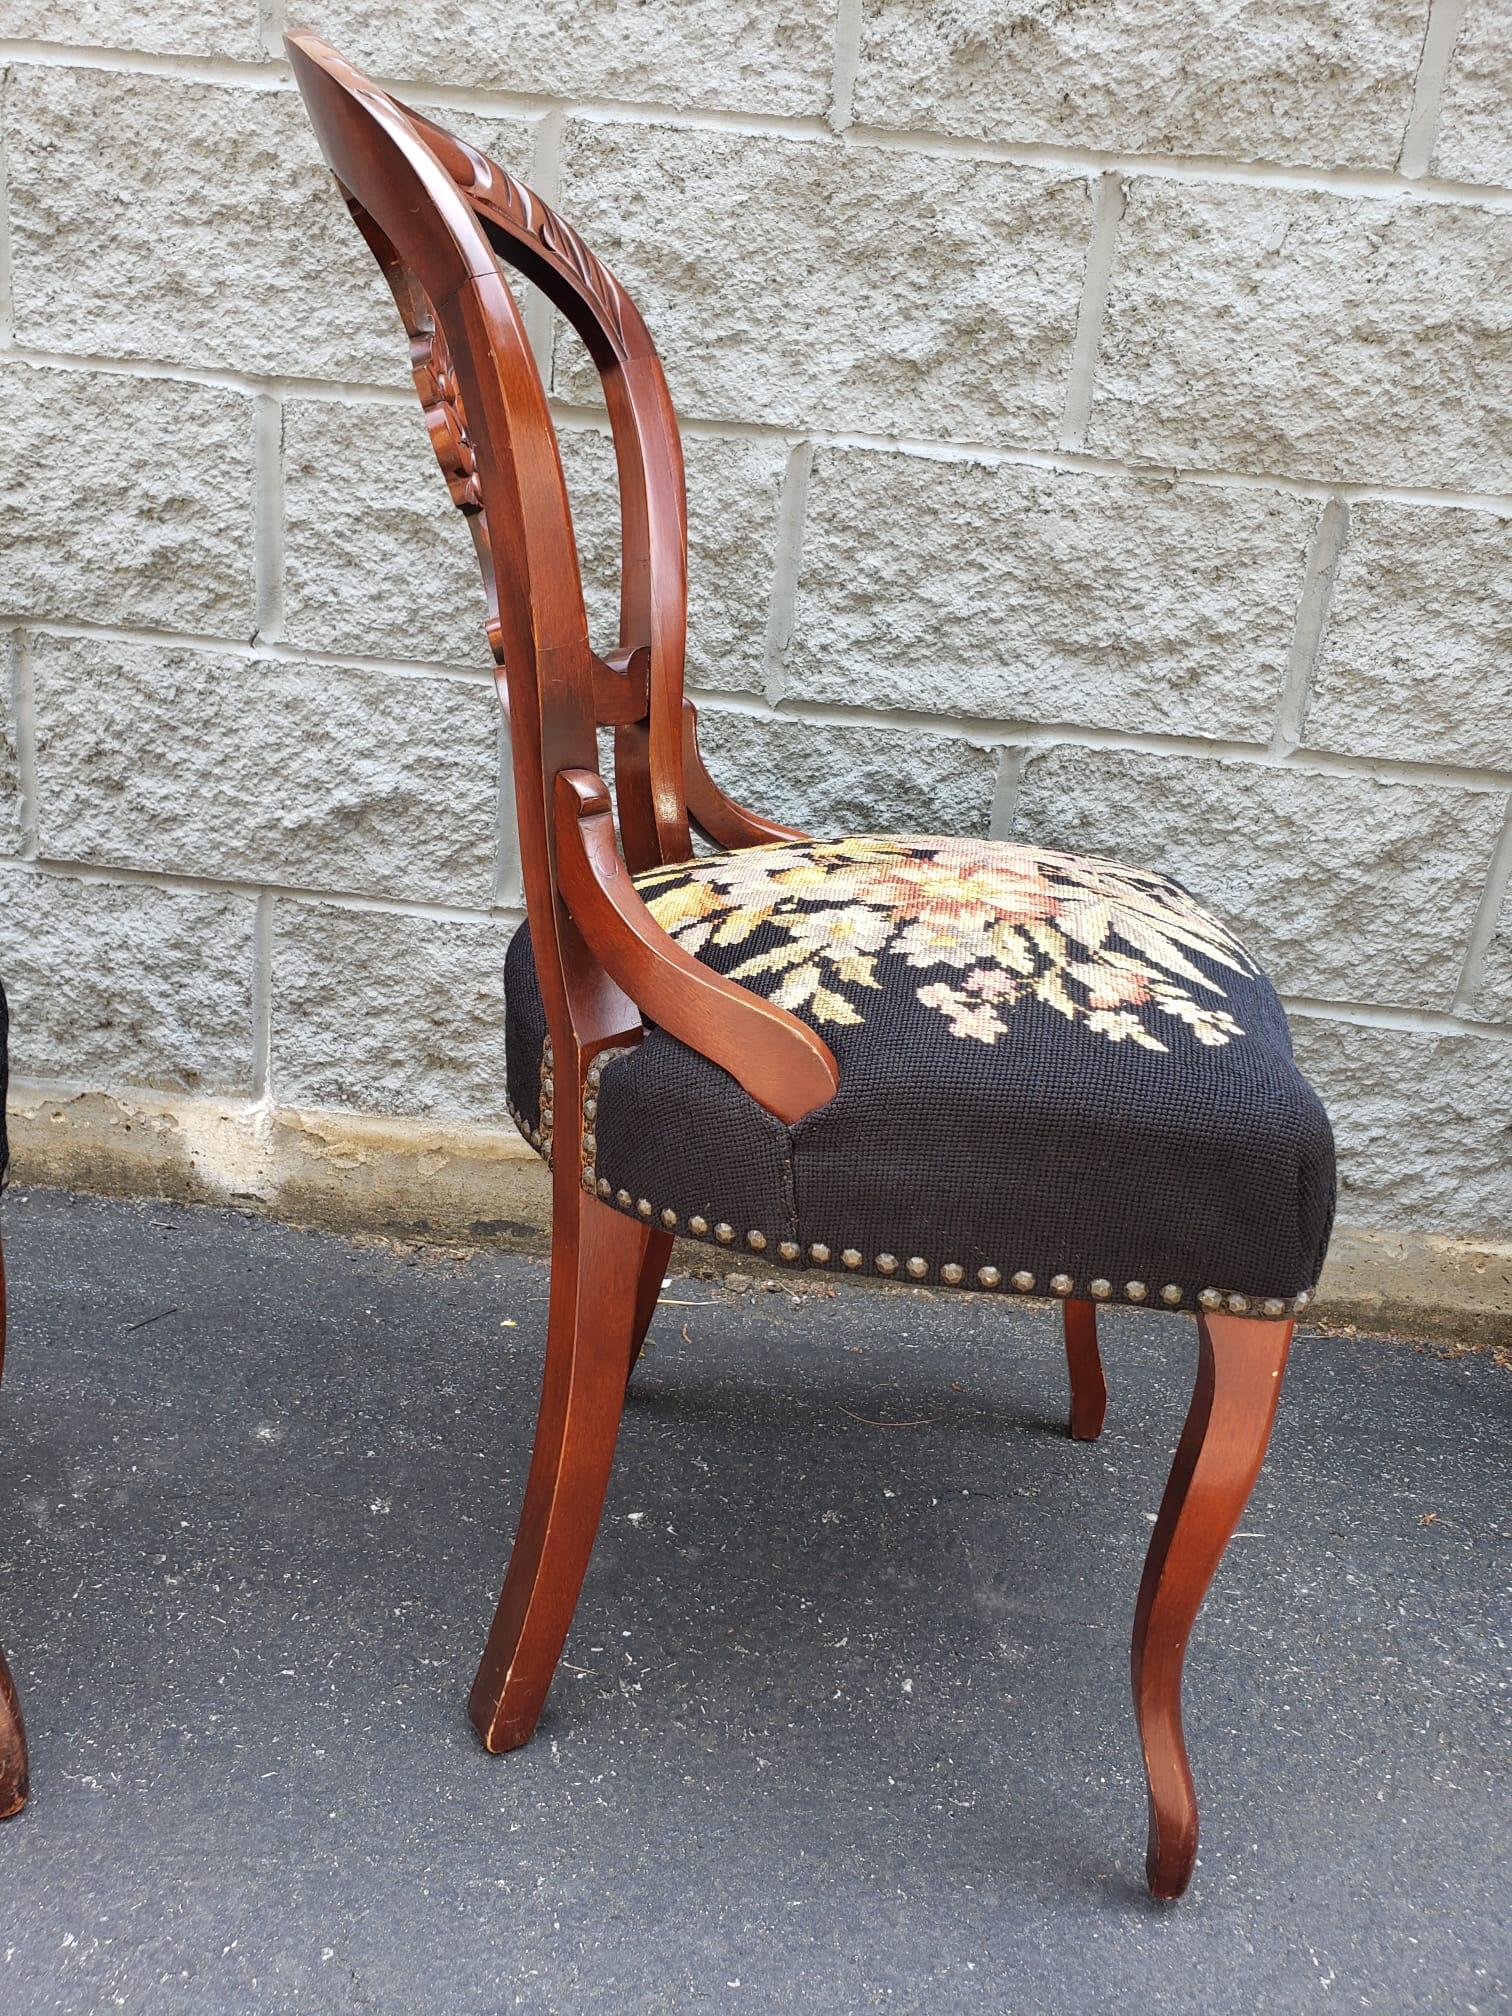 Victorian Mahogany & Floral NeedlePoint Upholstered Chairs with NailHead Trims In Good Condition For Sale In Germantown, MD